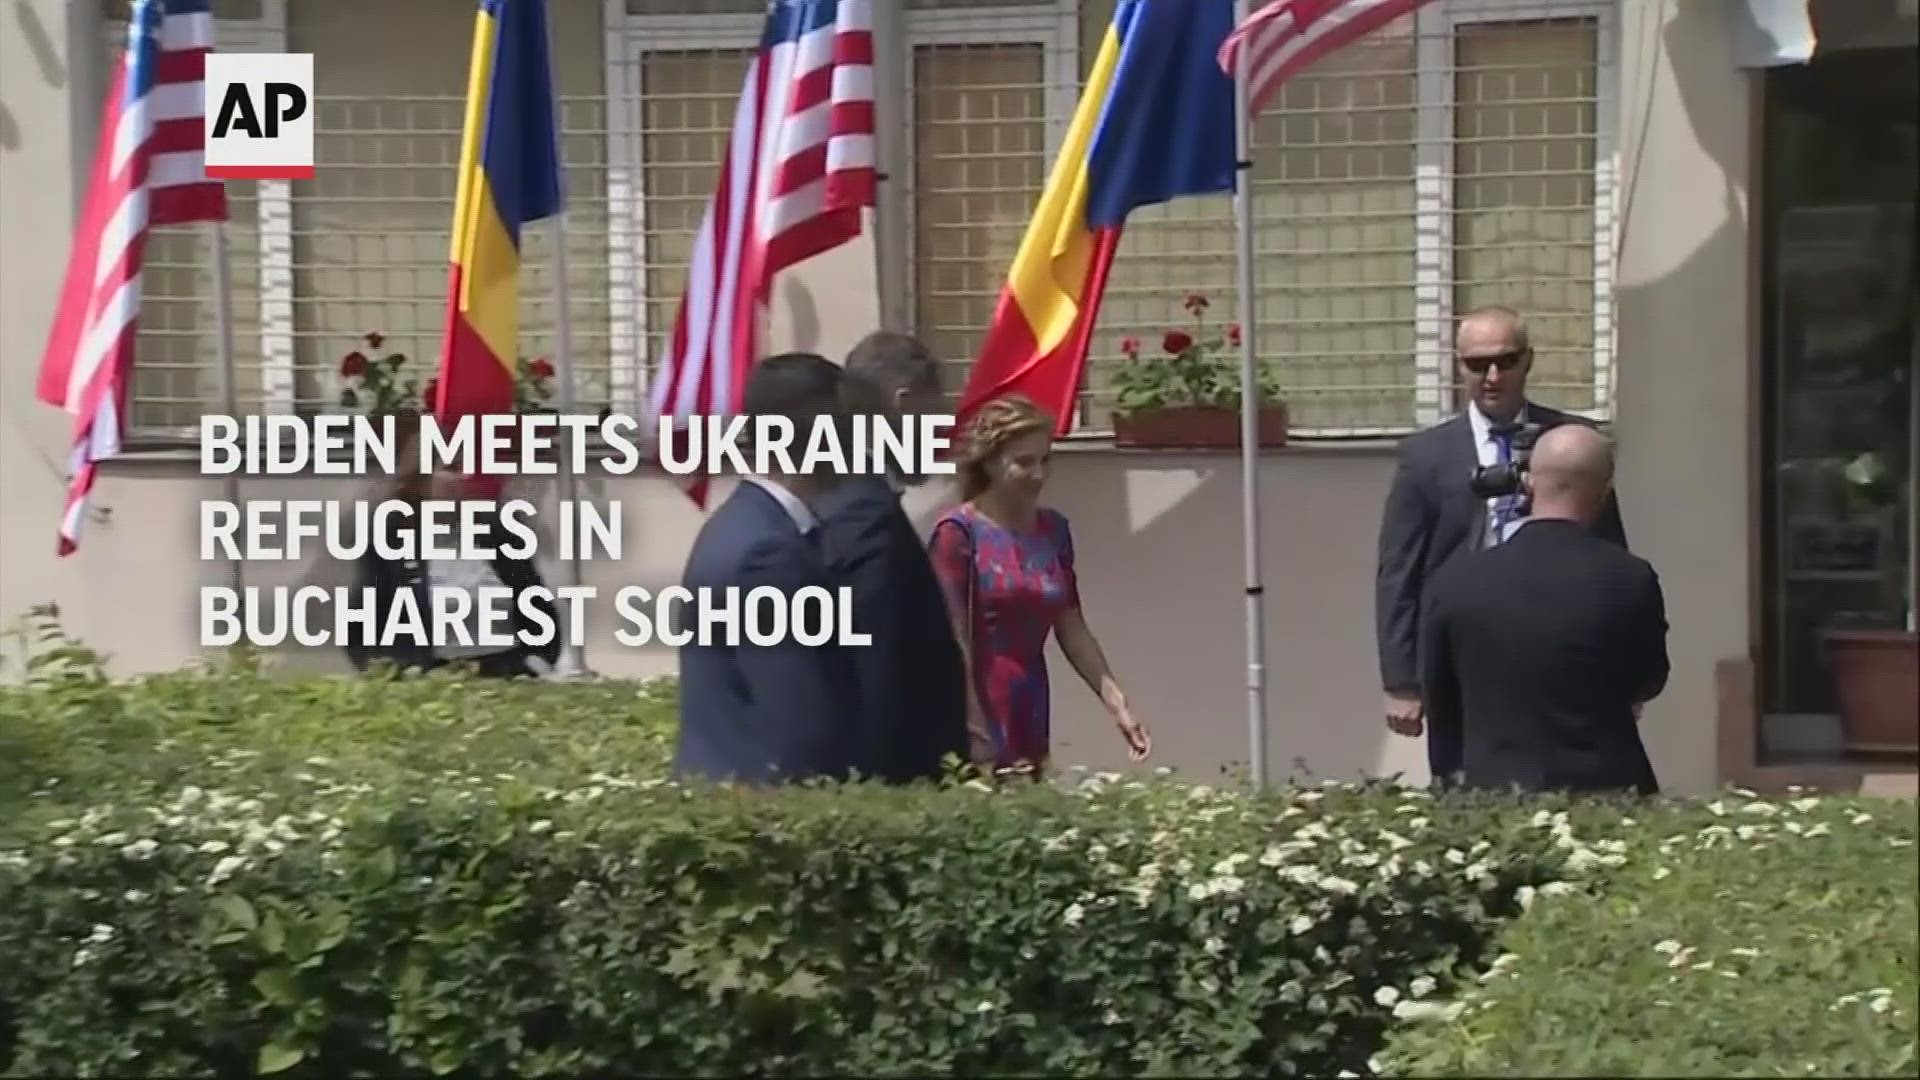 First lady Jill Biden visited a school in Romania that is helping to educate young Ukrainian refugees forced to flee their country due to the war.